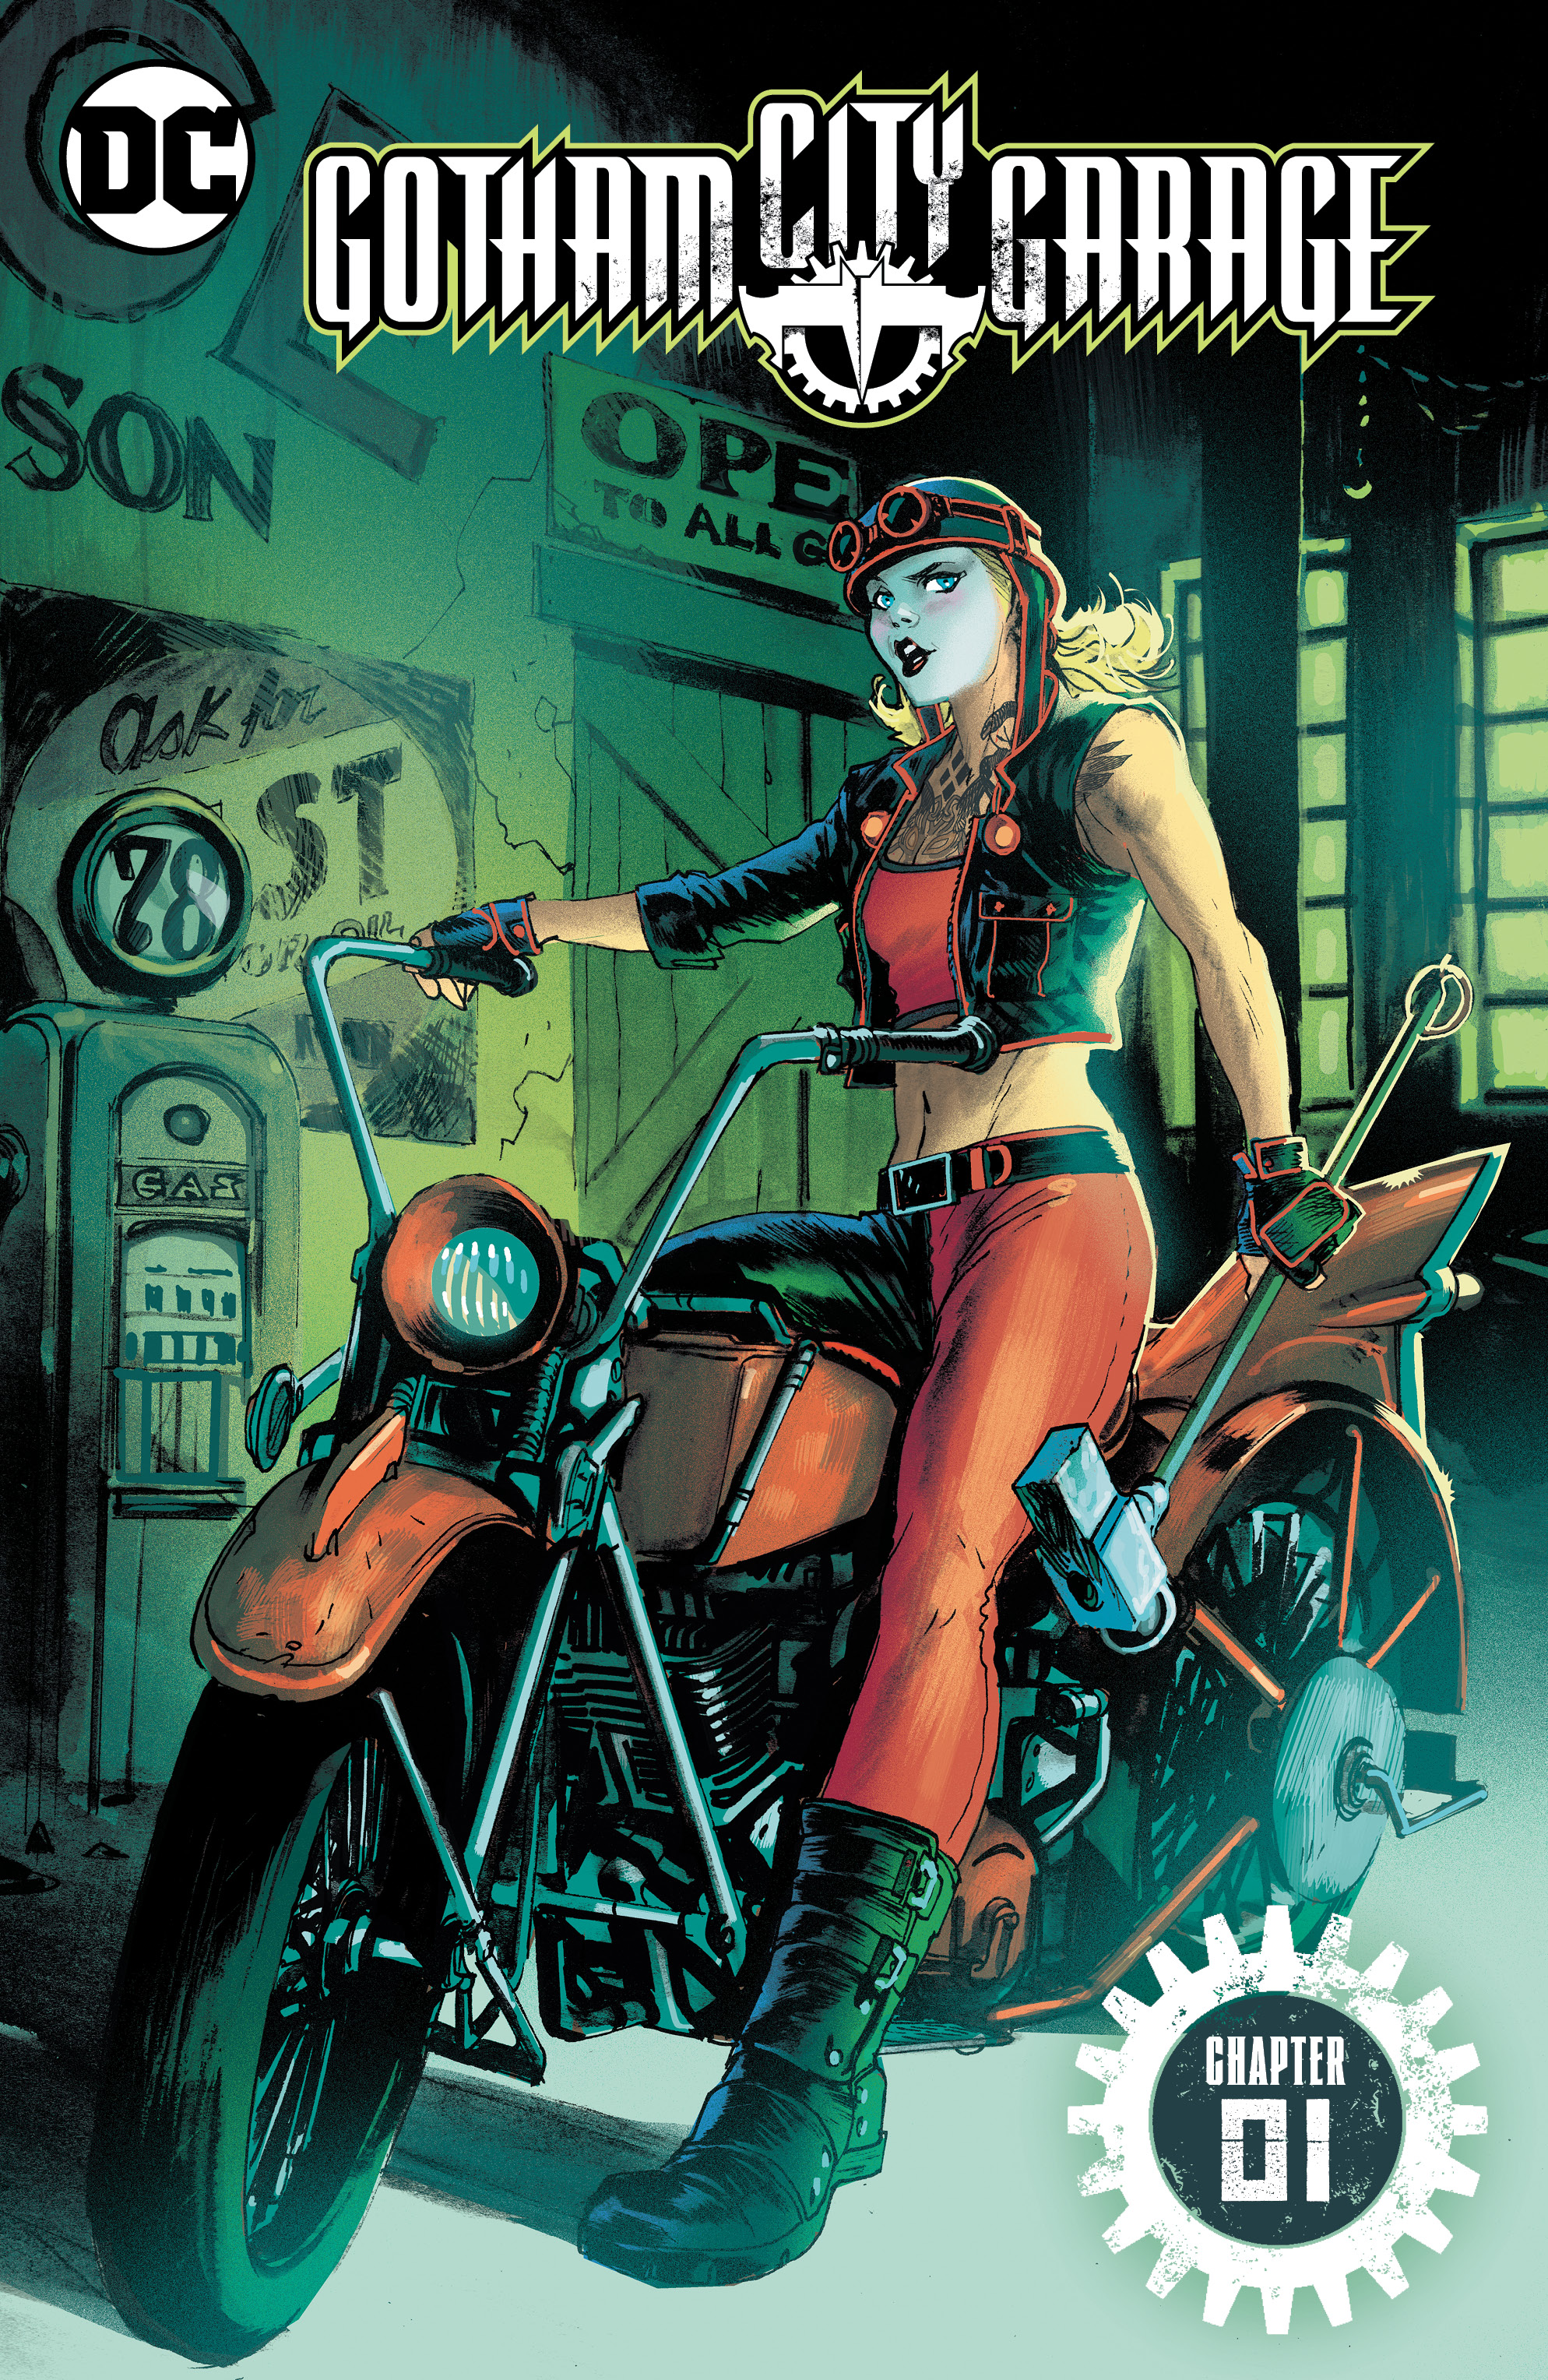 Gotham City Garage #1 preview images